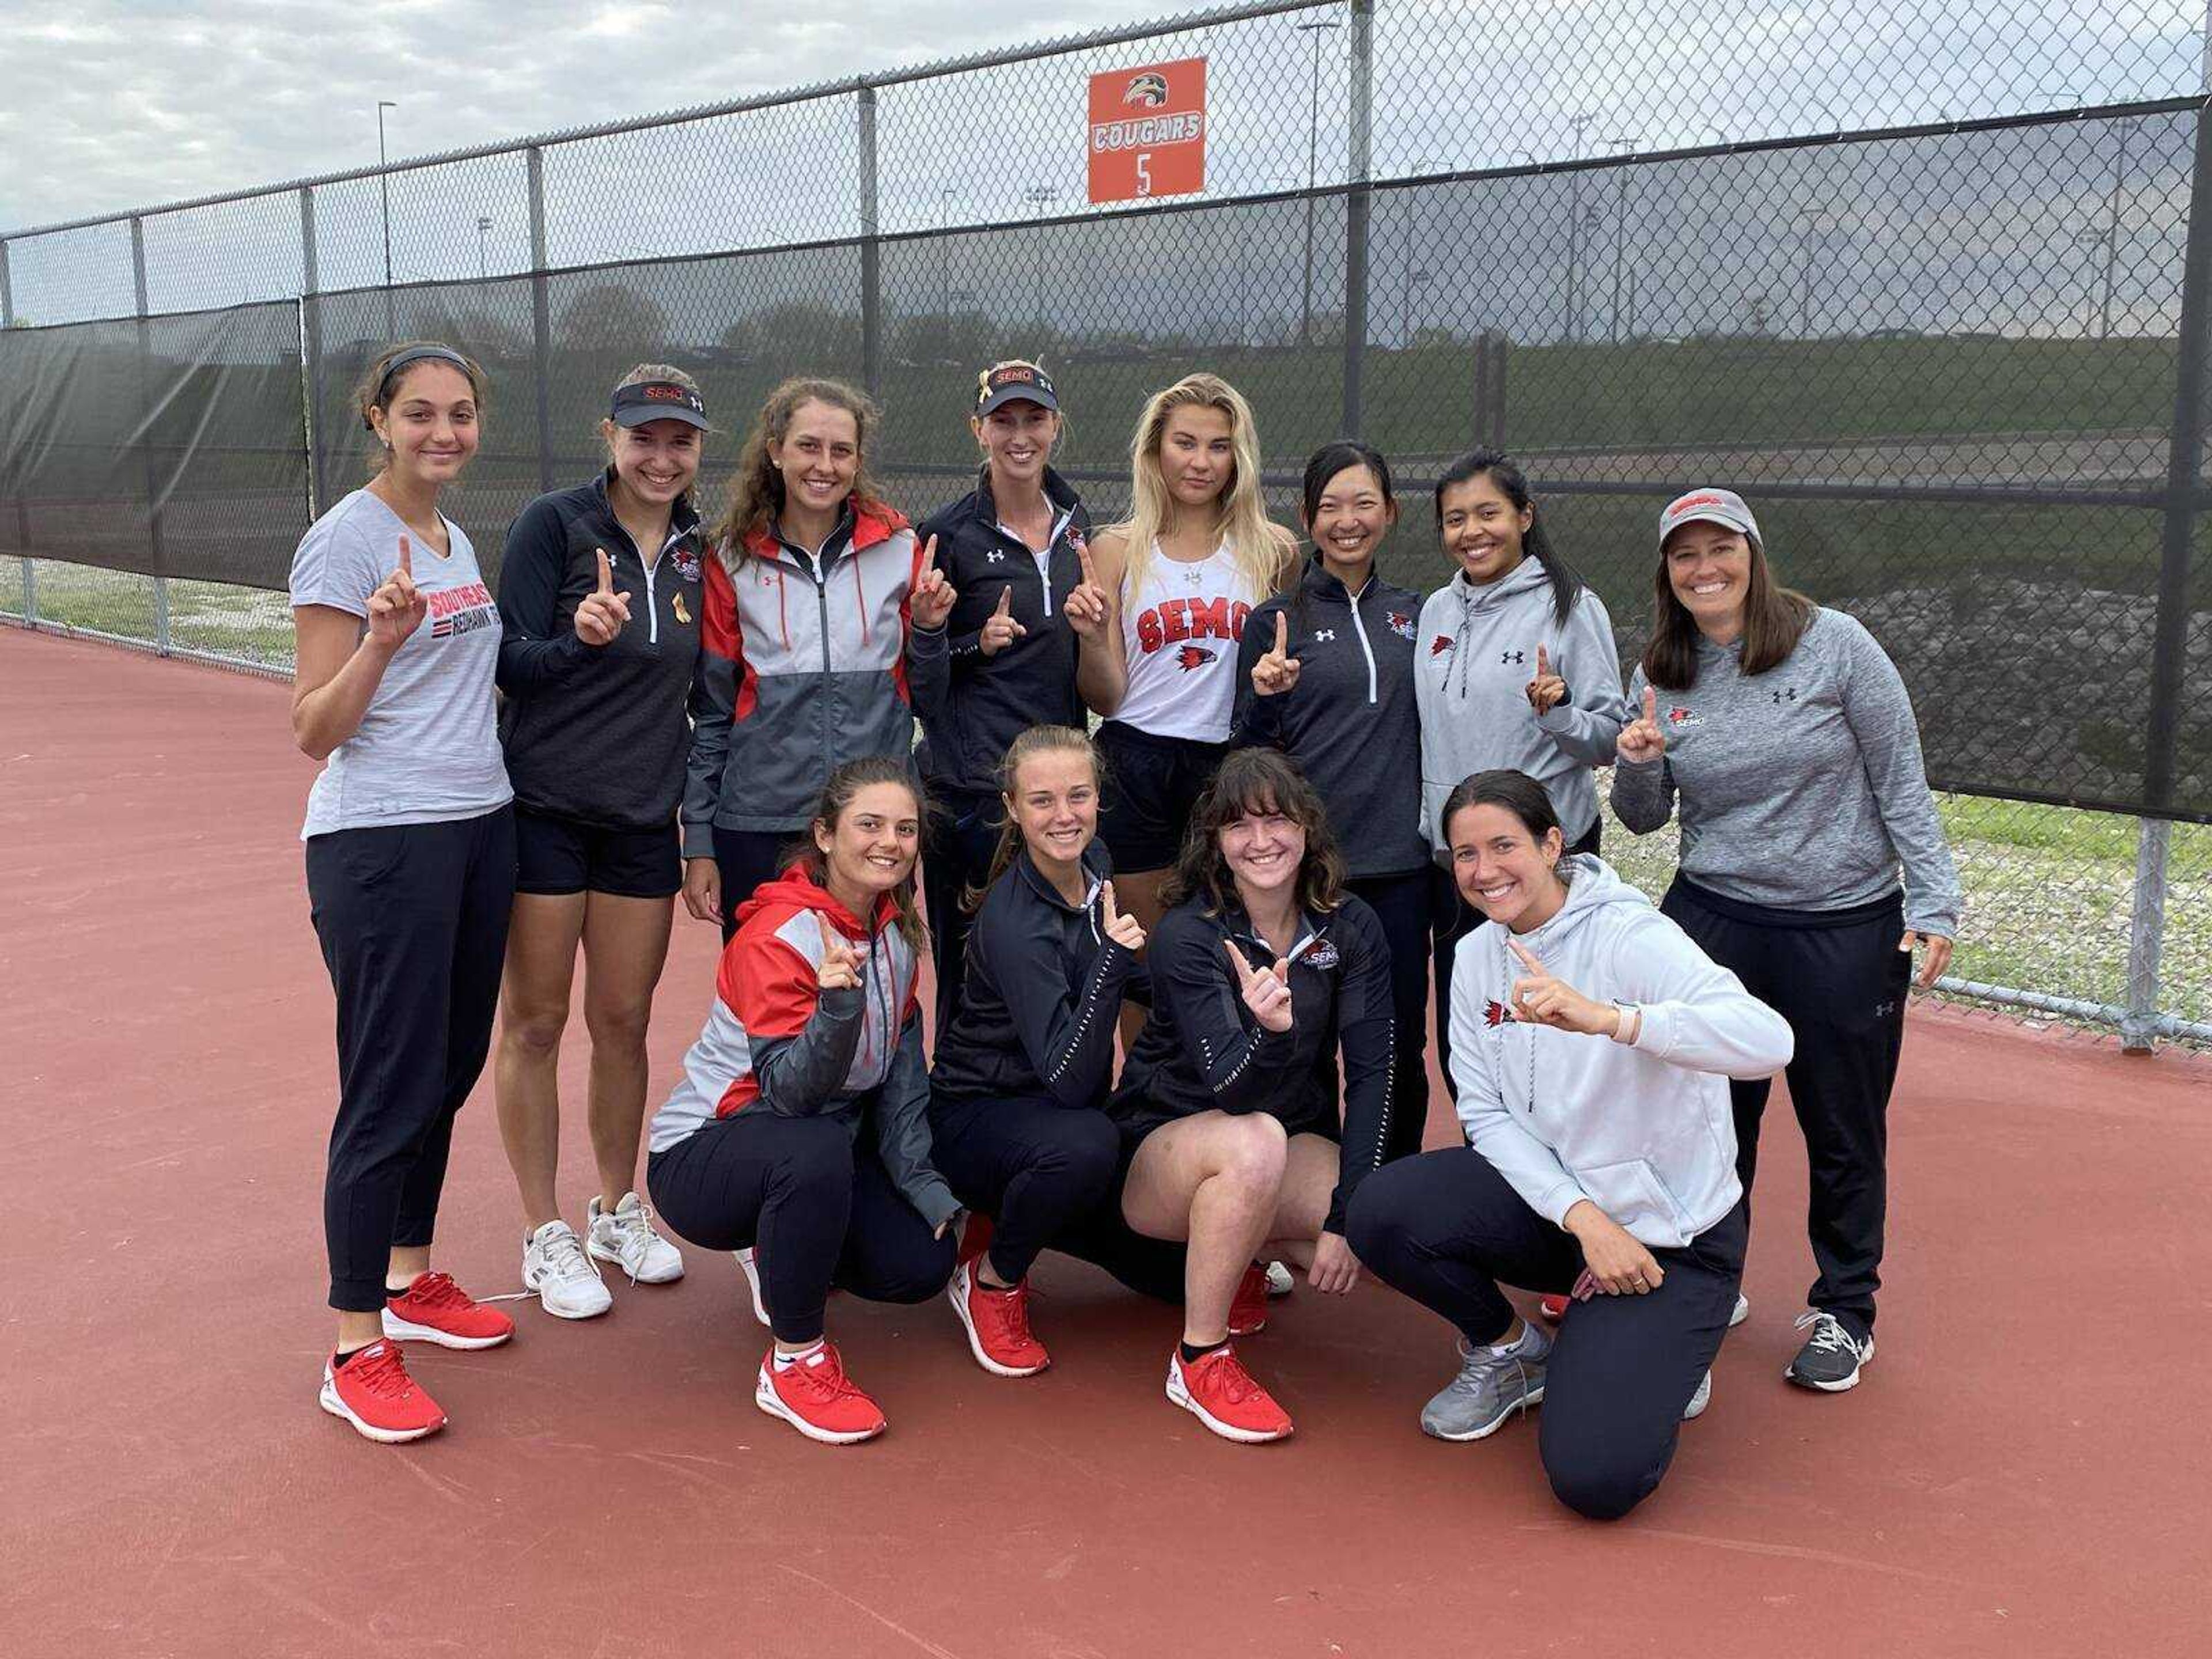 High-performing tennis team earns first OVC title in program history